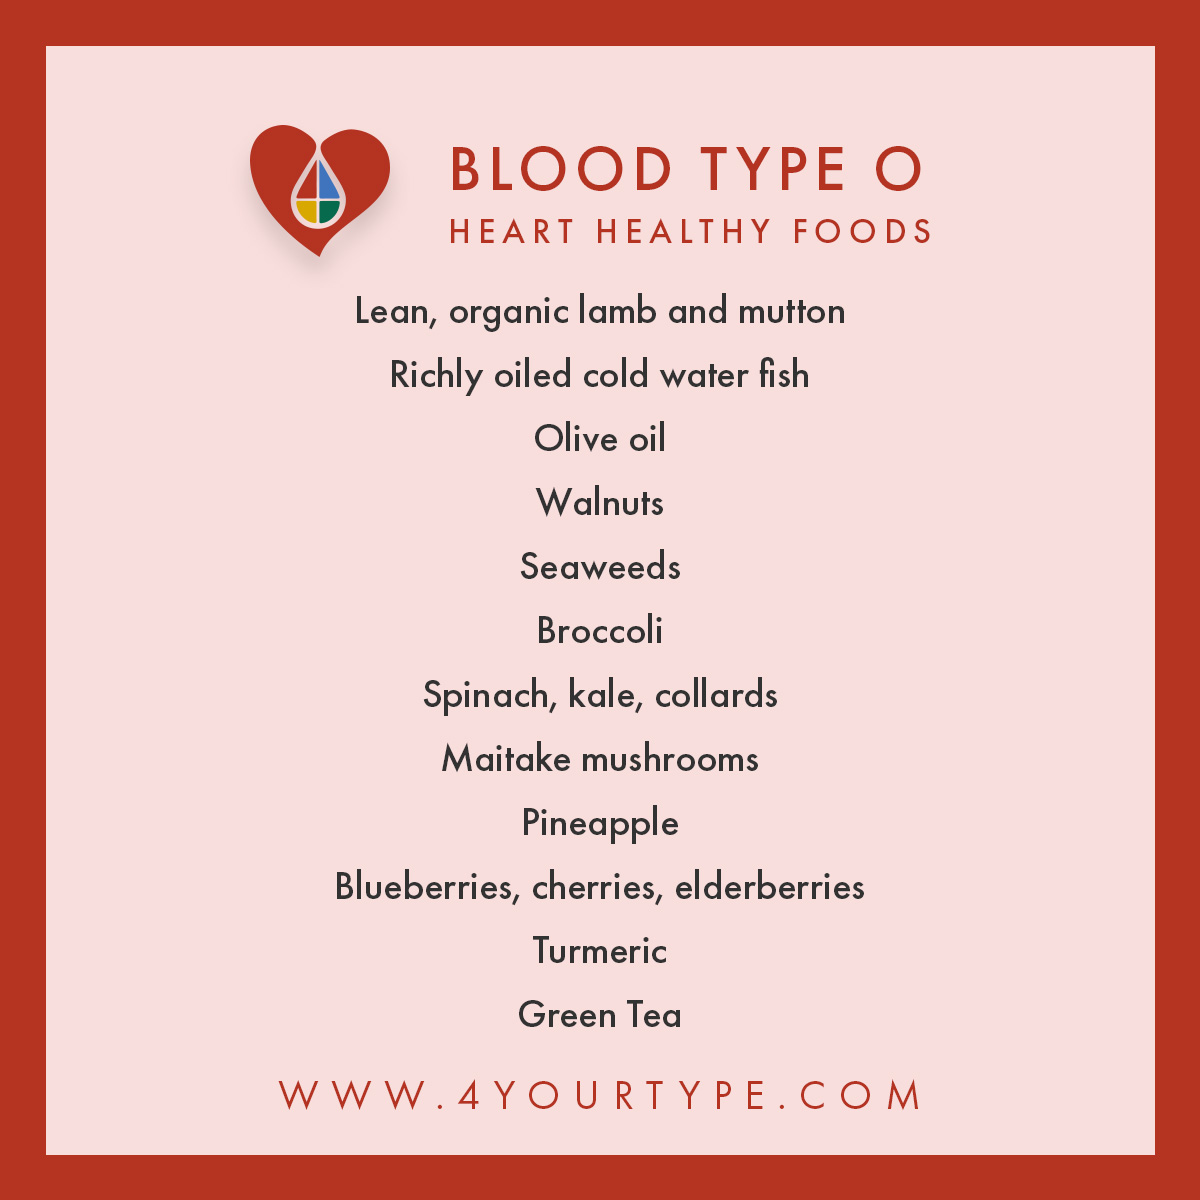 A Healthy Heart with The Blood Type Diet  Eat Right 4 Your Type - D'Adamo  Personalized Nutrition - Blood Type Diet